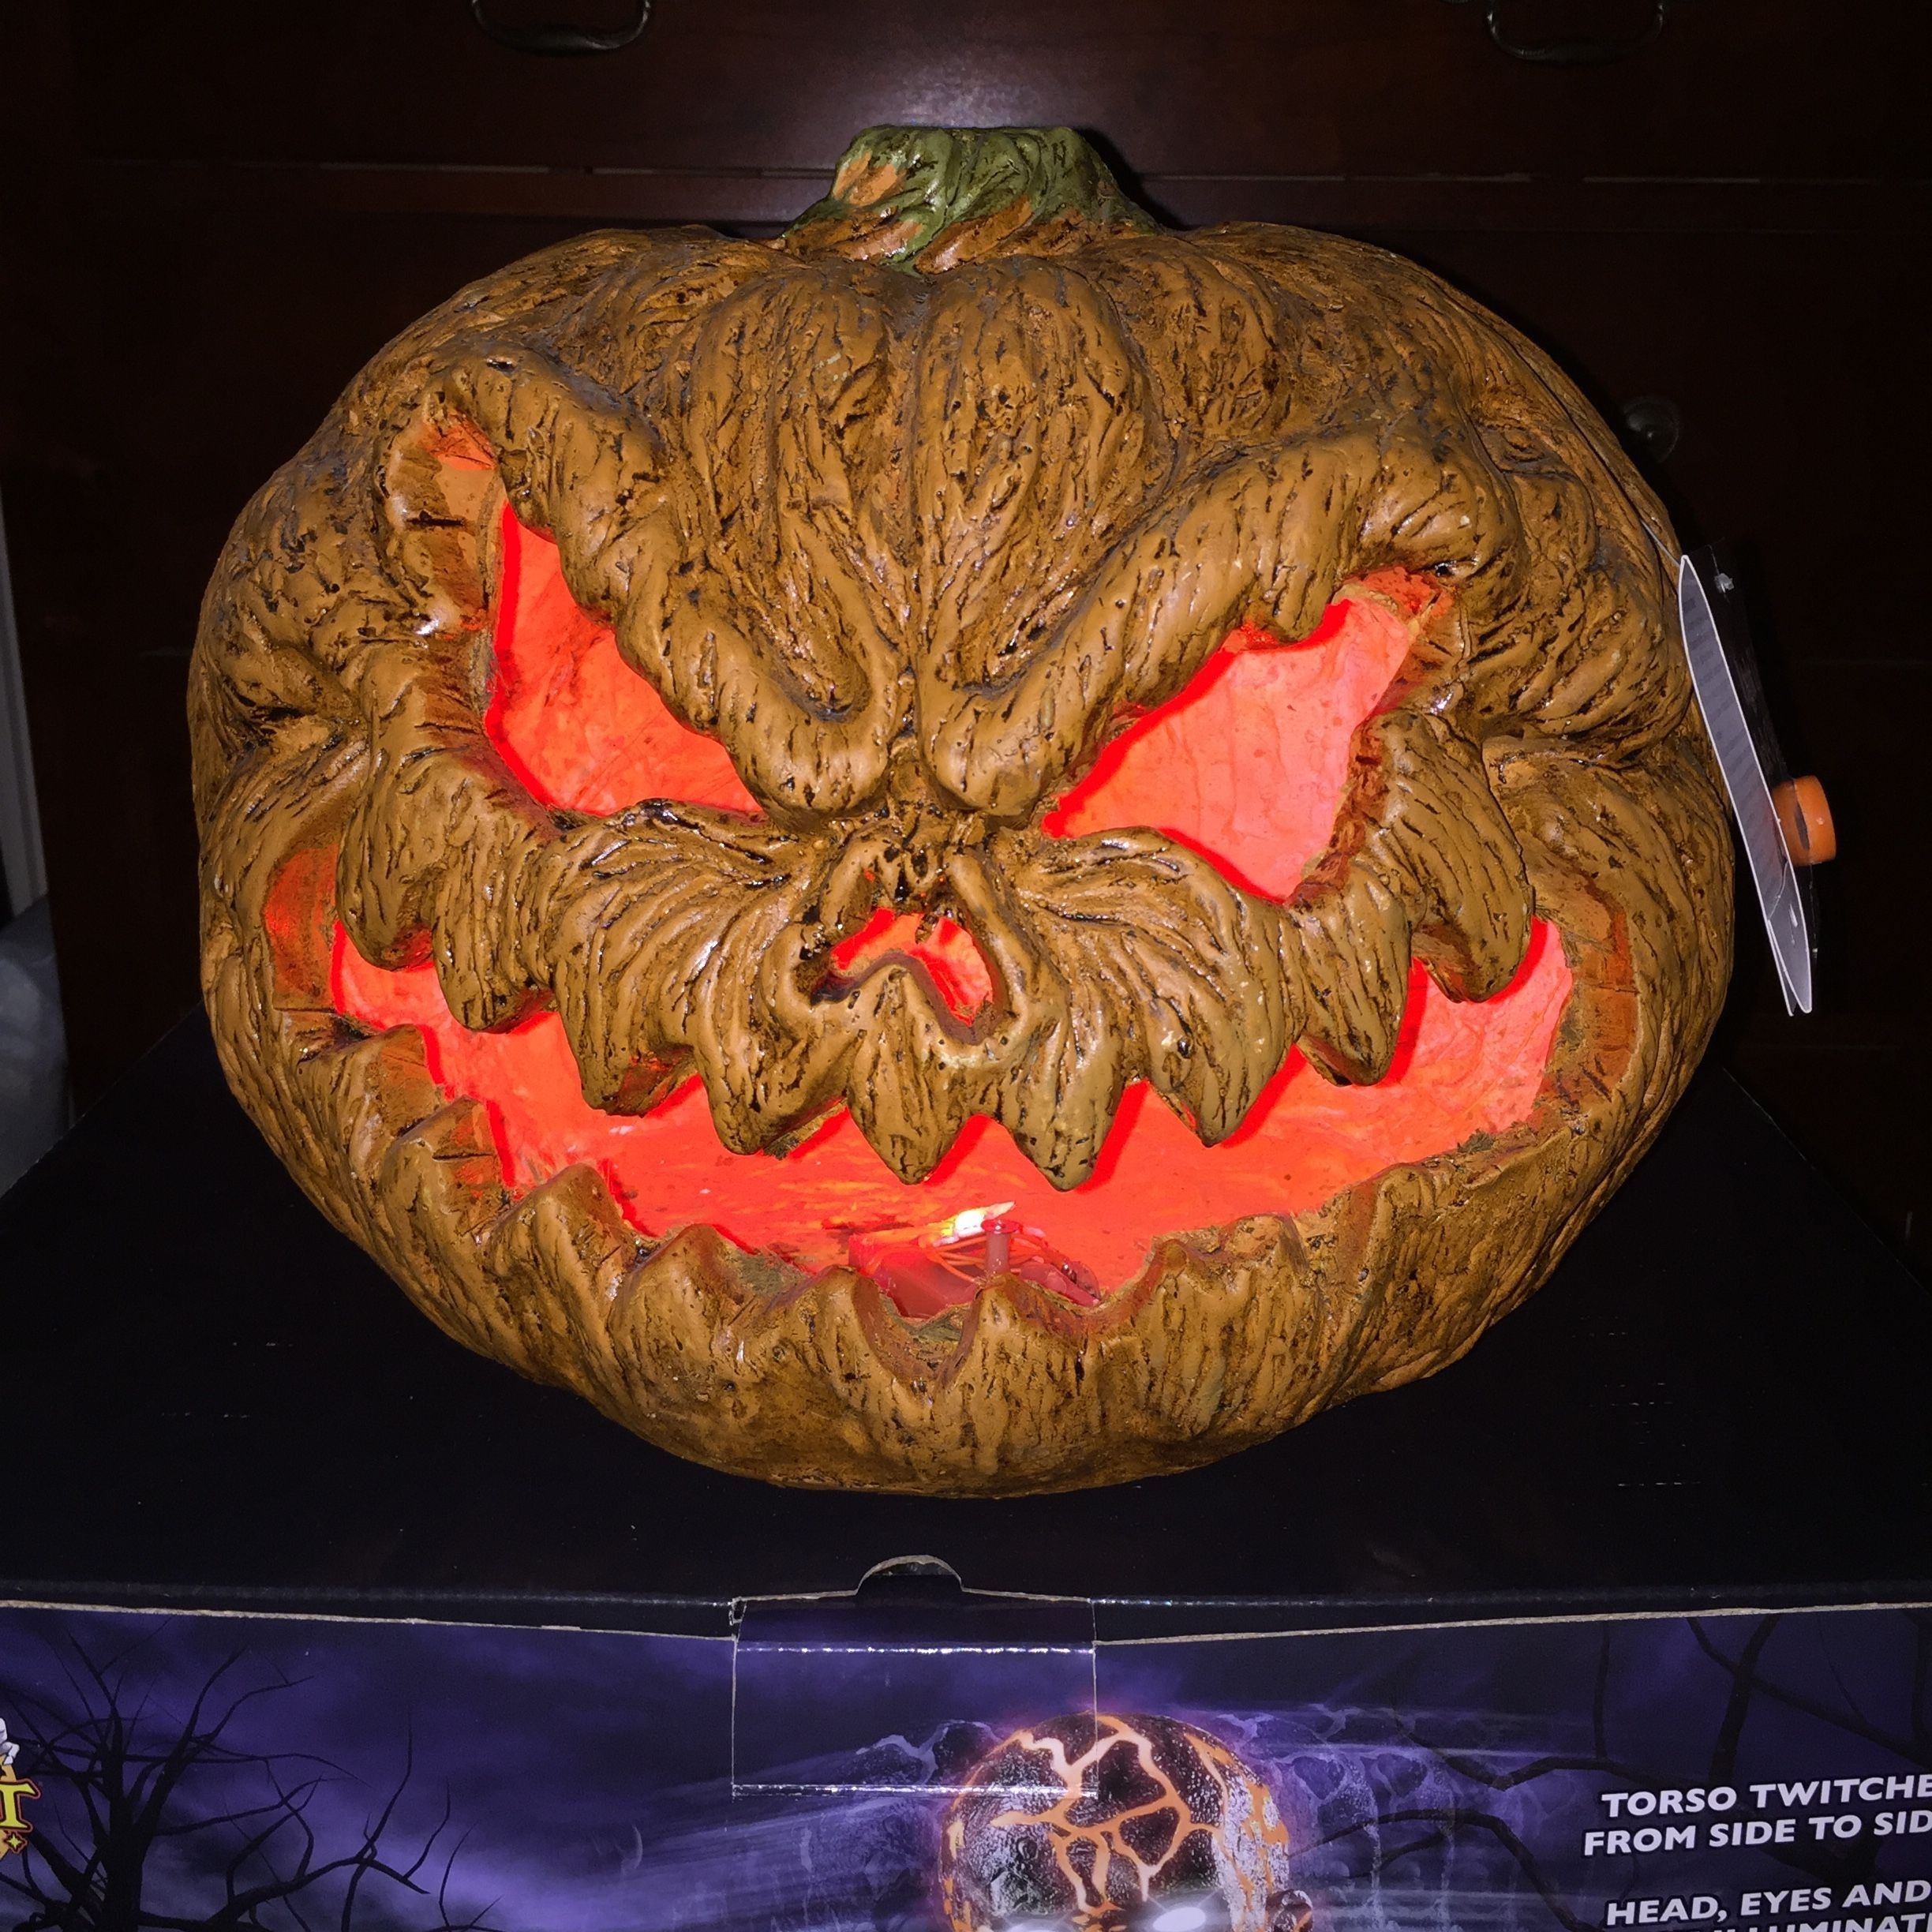 Got This Light Up Evil Jack O Lantern At My Local Kroger With Regard To Kroger Outdoor Lanterns (View 18 of 20)